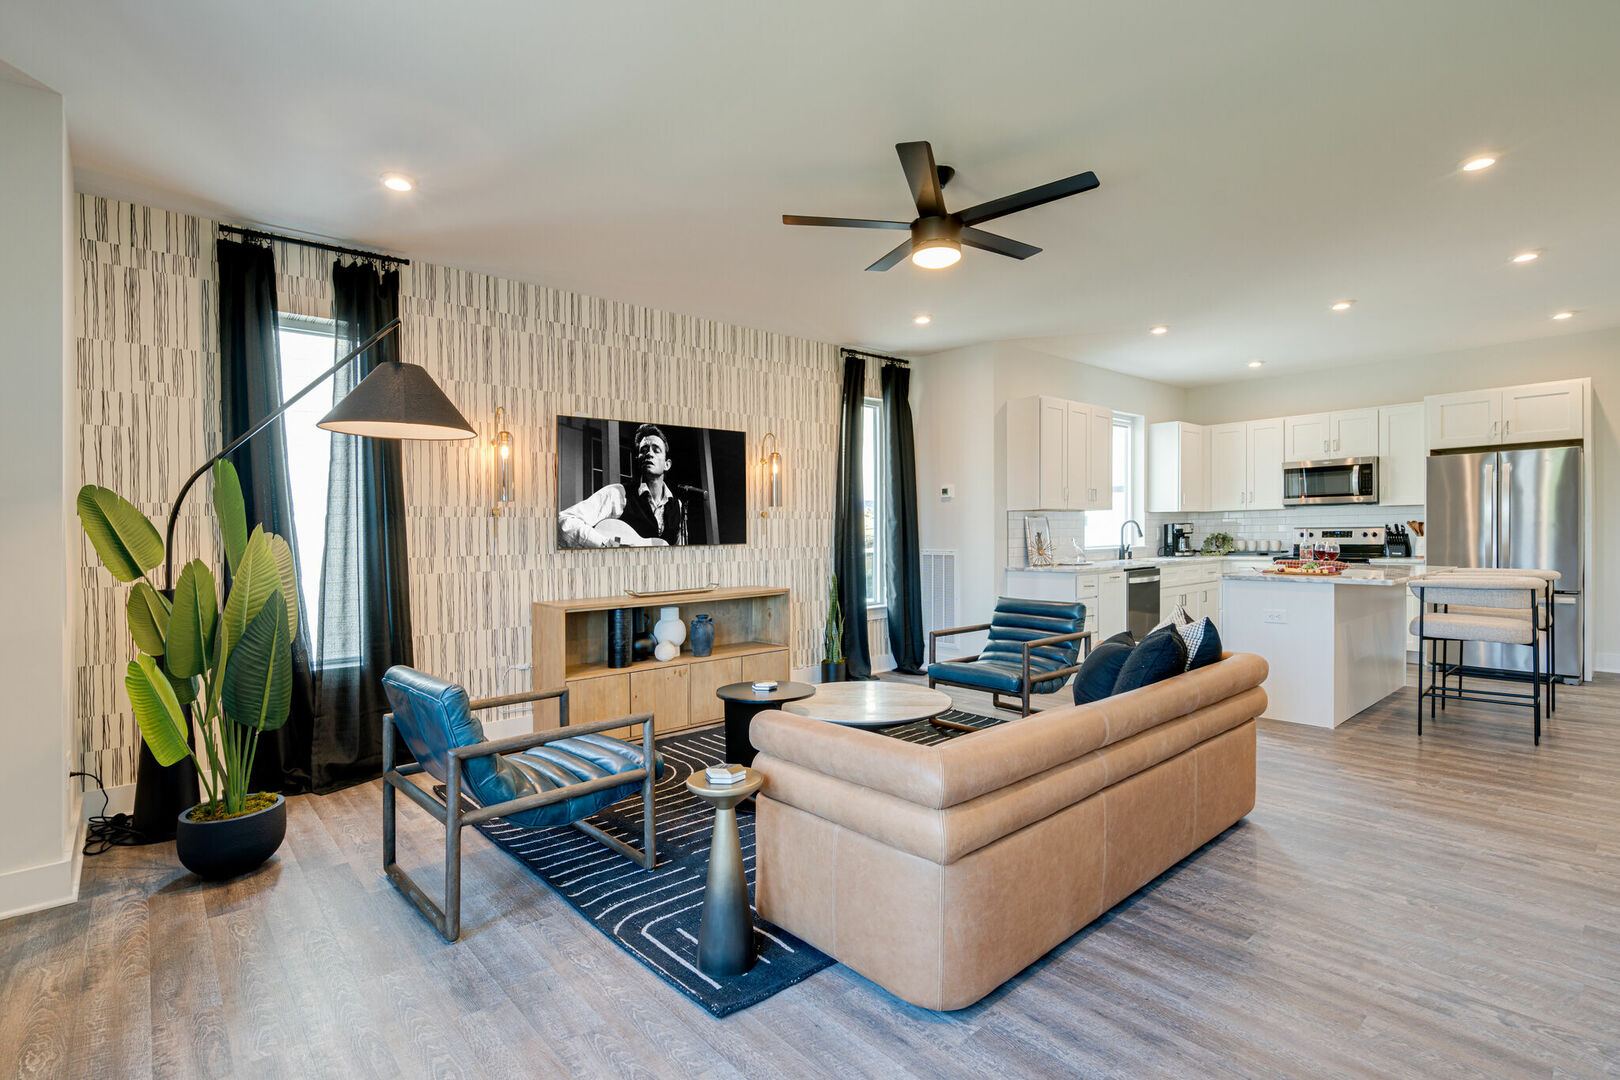 3rd Unit, 2nd Floor: Open concept bring living space featuring a smart flat-screen tv and designer furnishings.